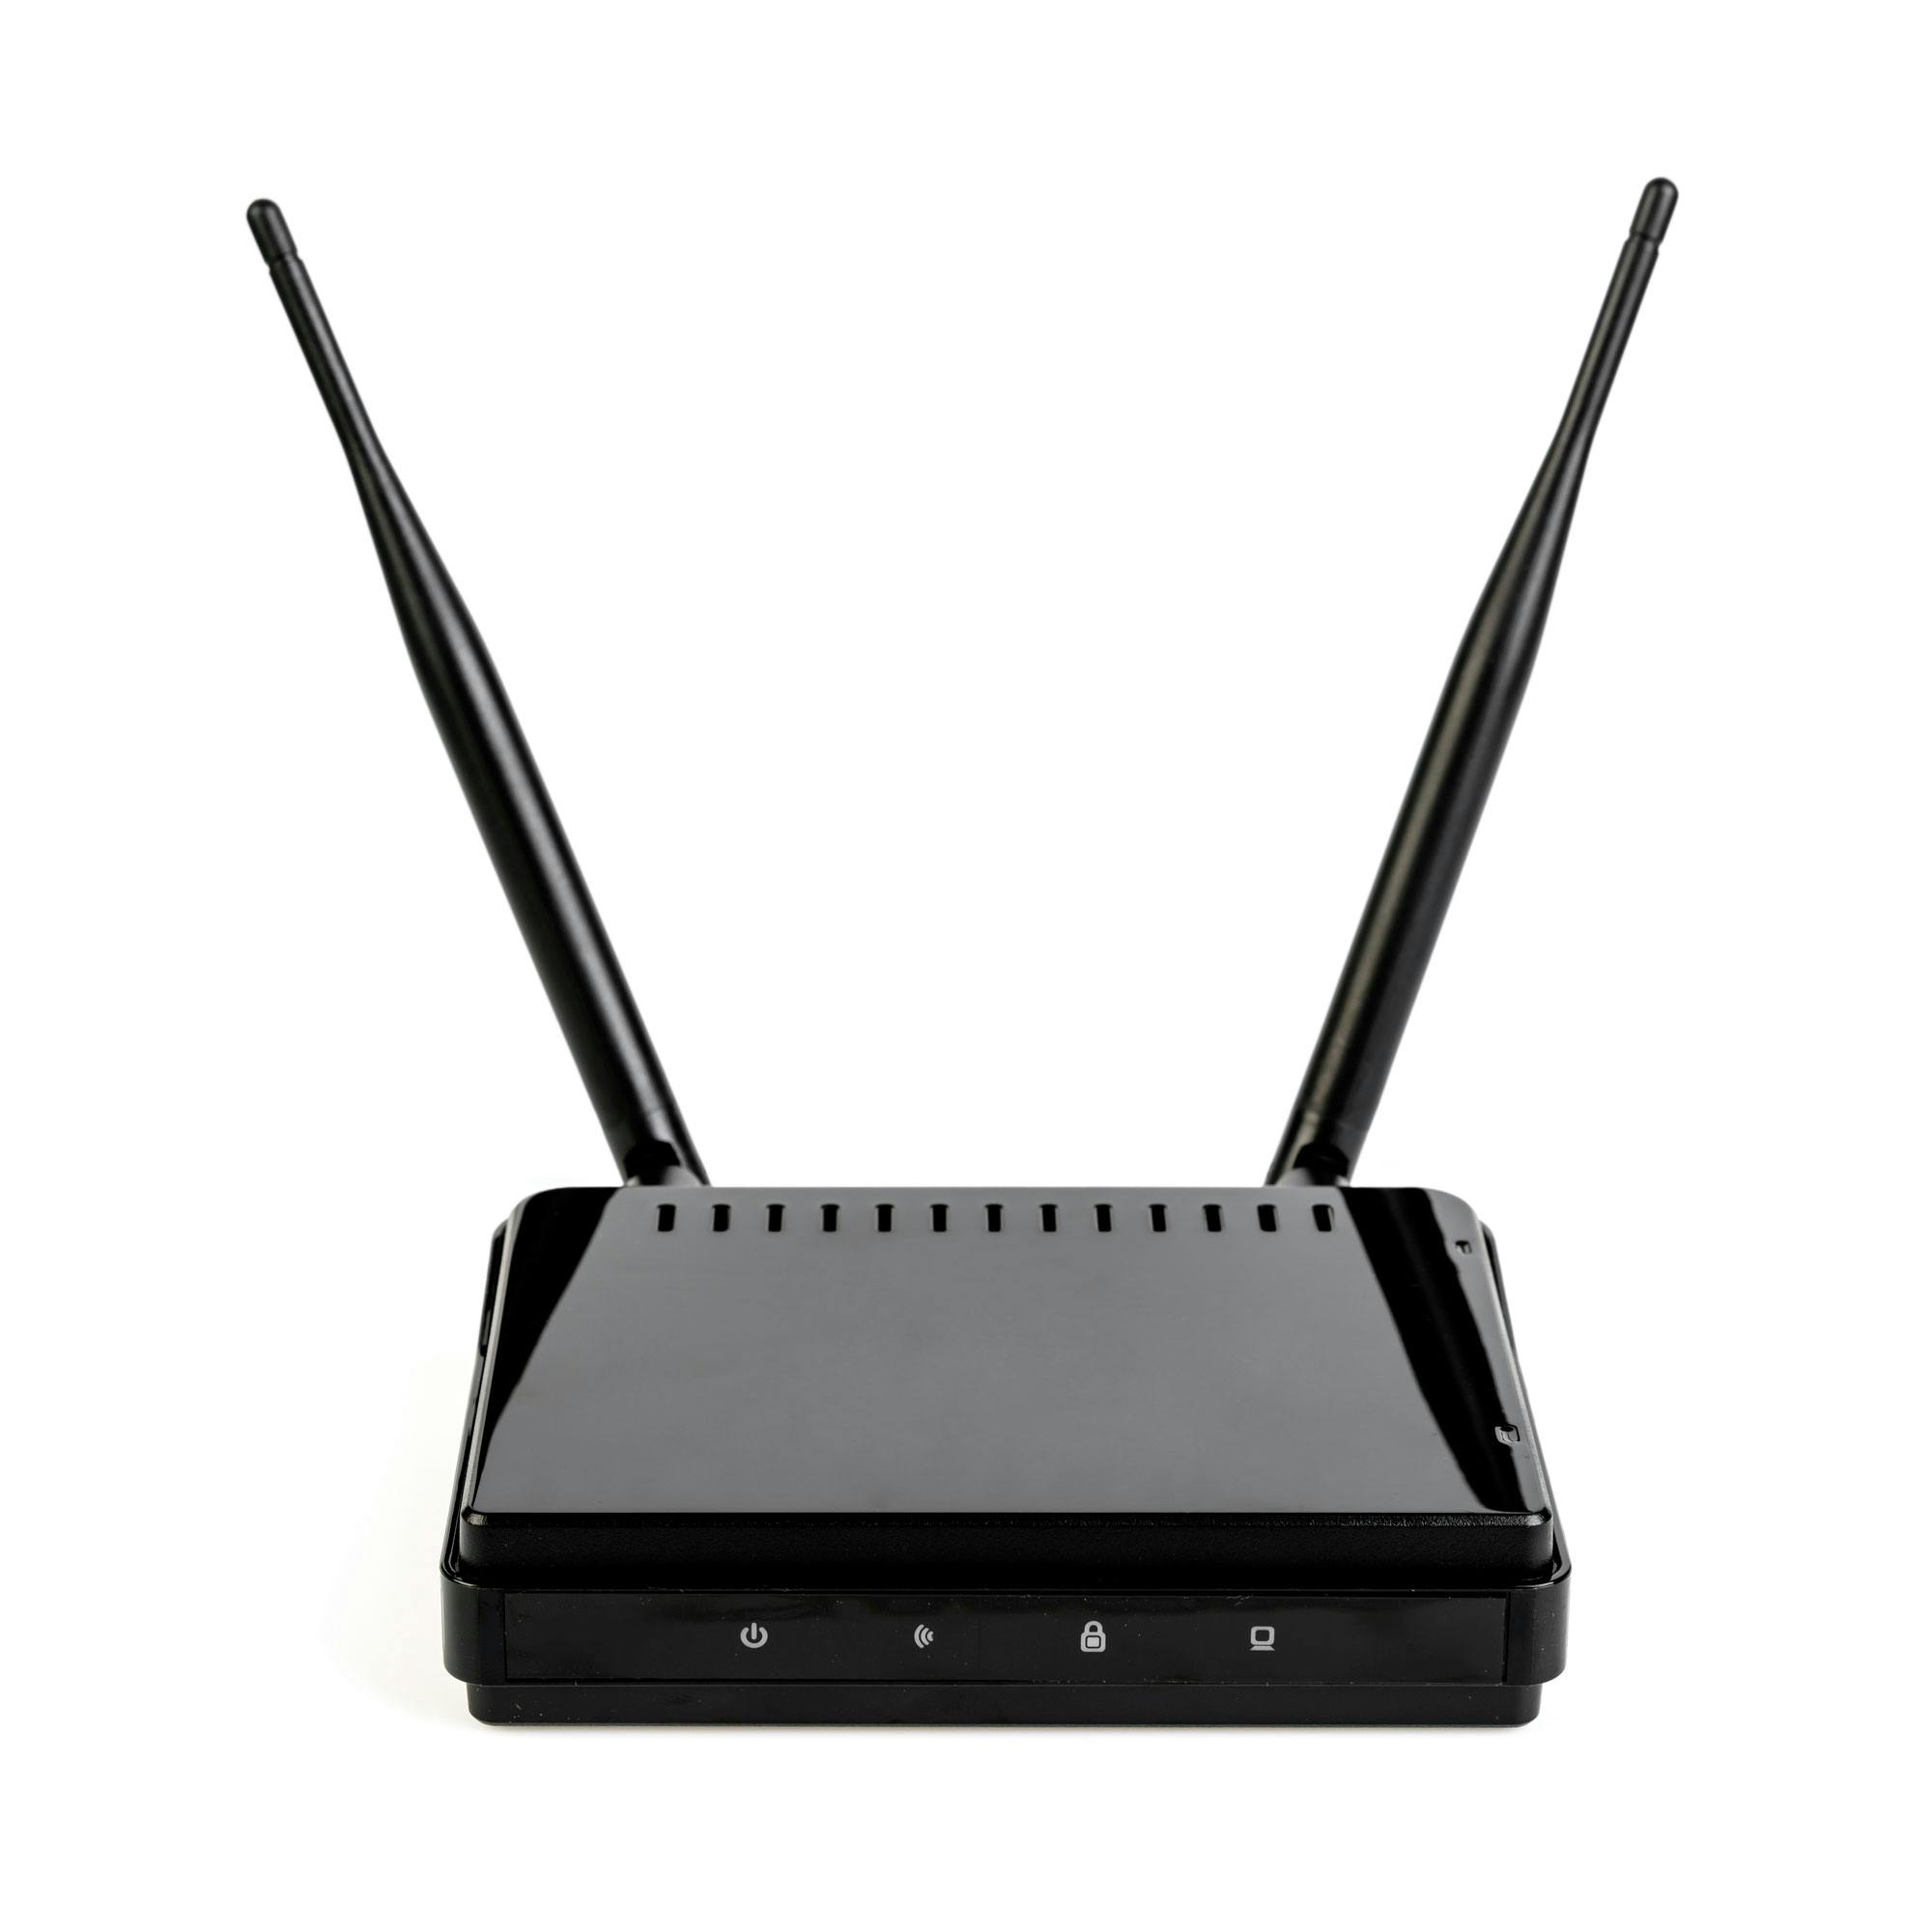 Can an old router slow down your internet?